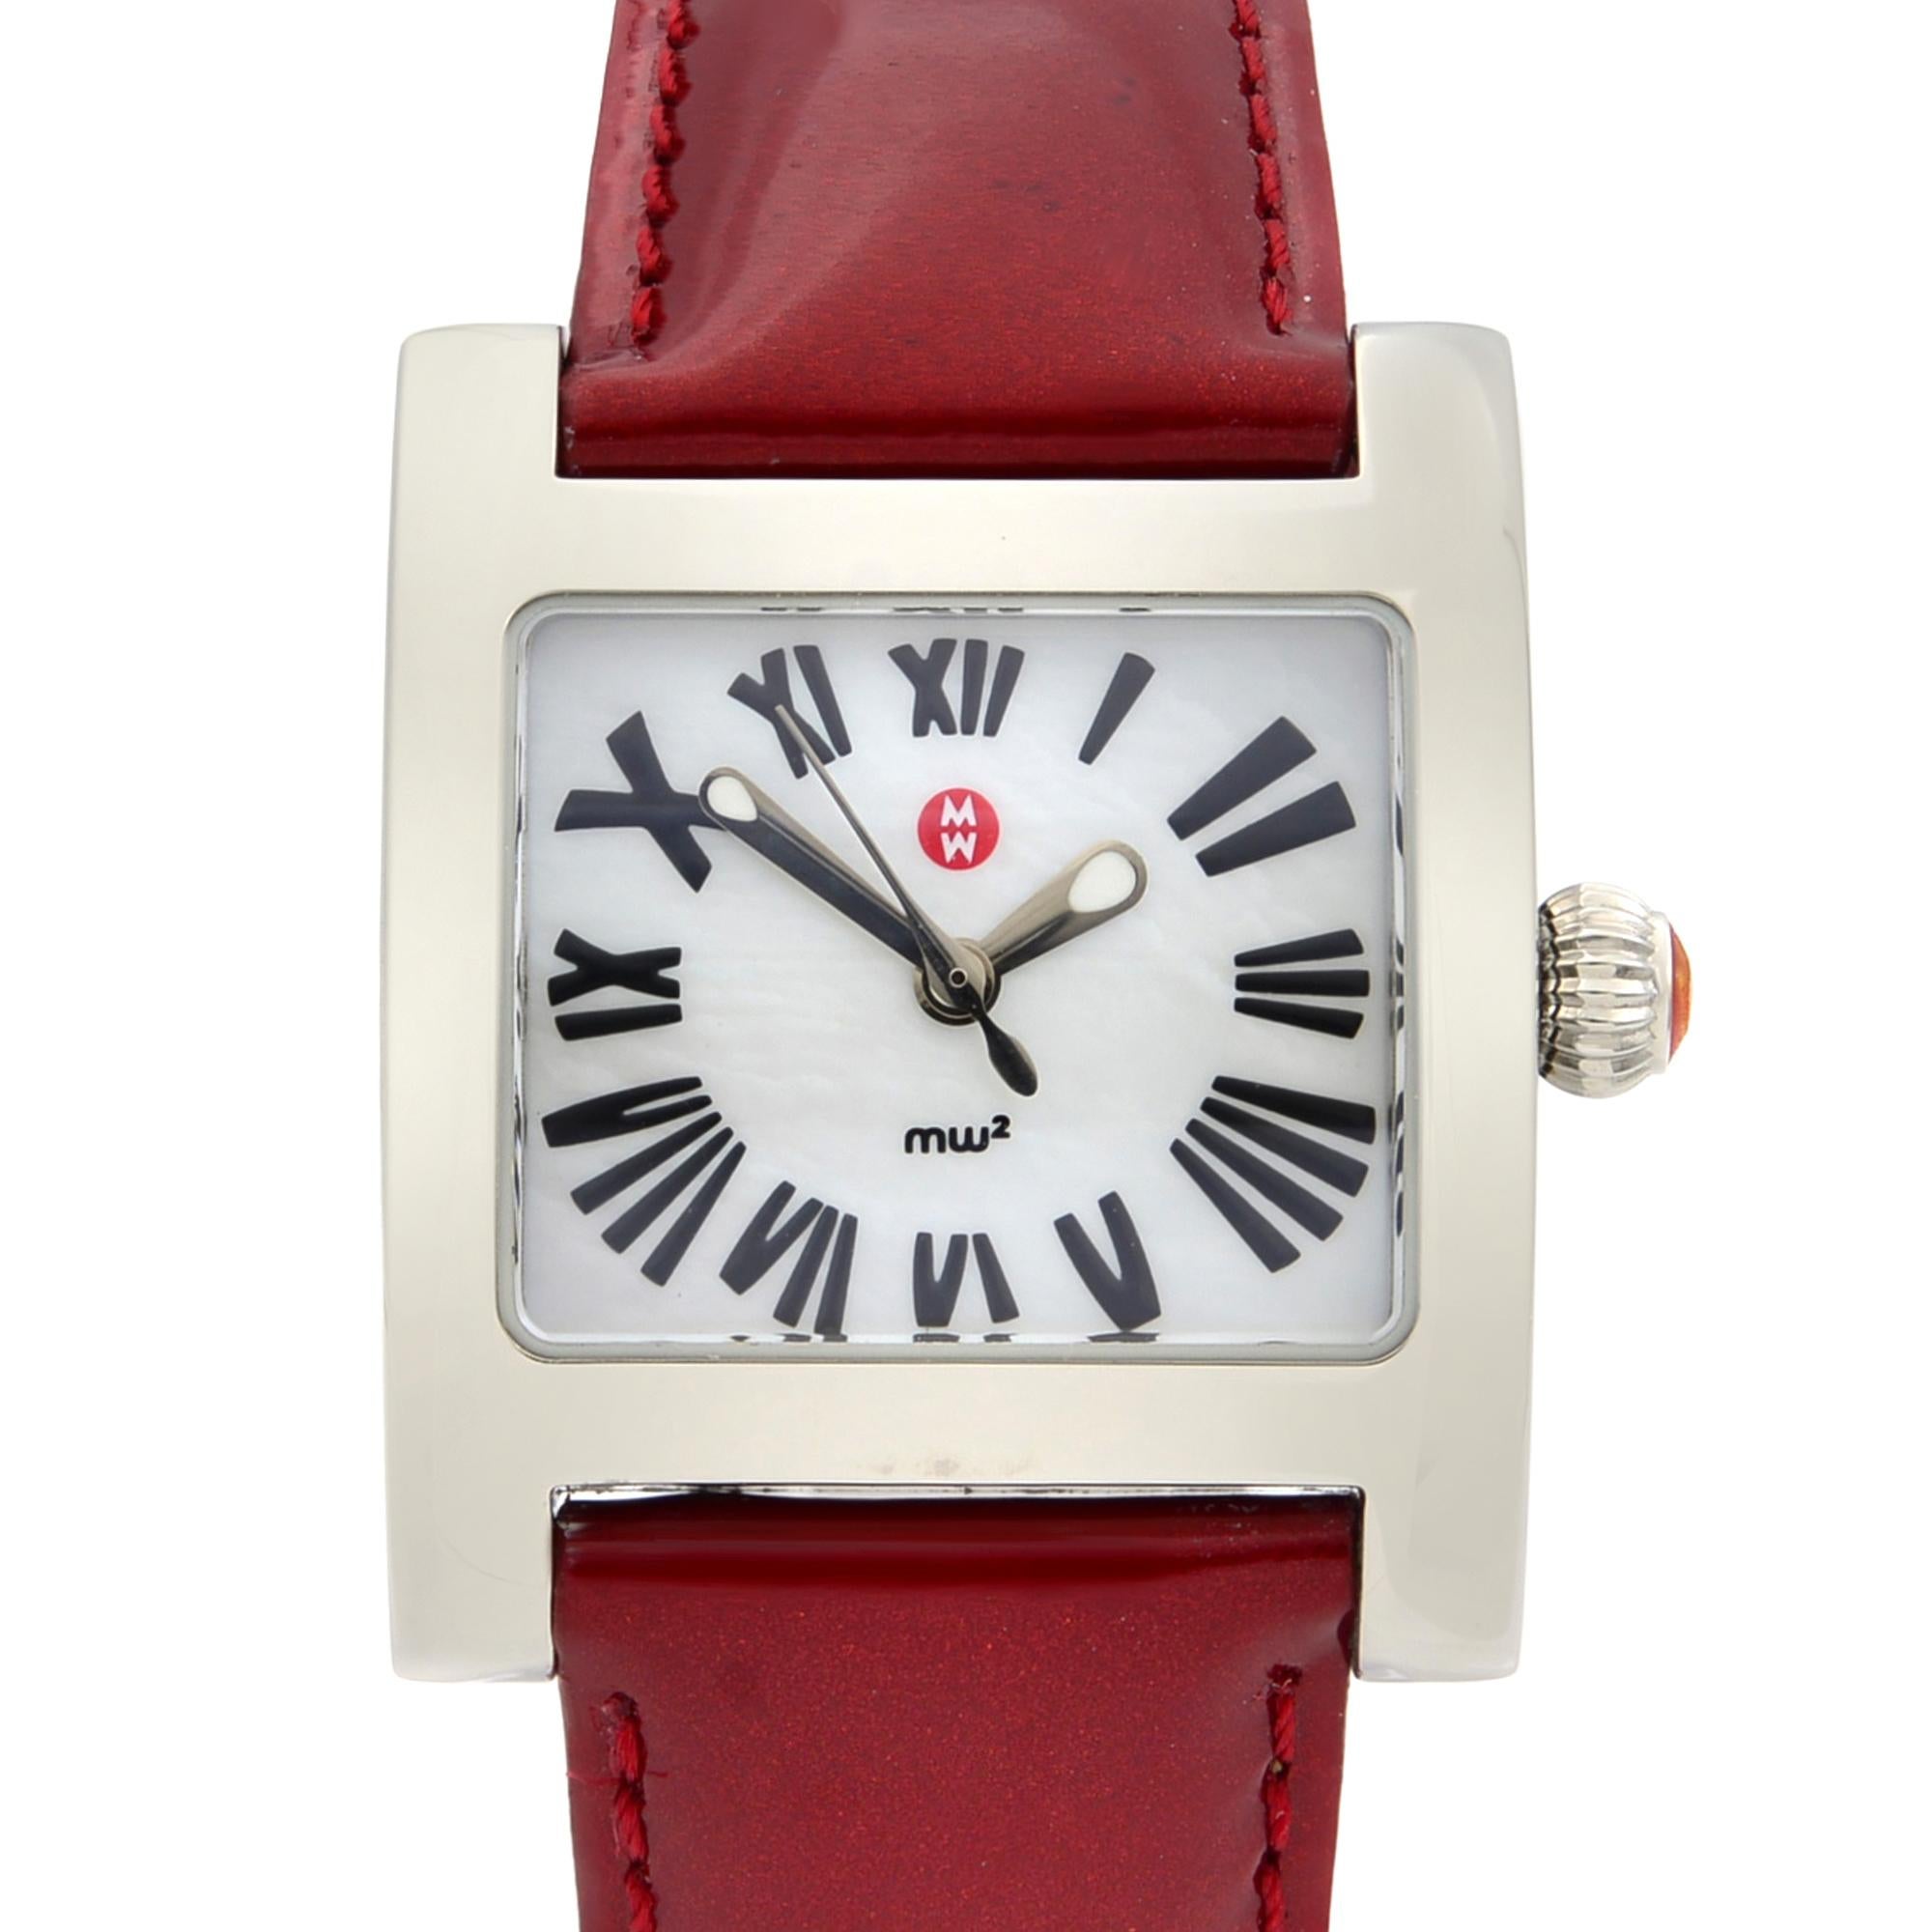 This watch comes with manufacturer's box and papers.
Details:
Model Number 71-740
Brand MICHELE
Department Women
Style Dress/Formal
Model mw2
Band Color Red
Dial Color Mother of Pearl
Case Color Gray
Display Analog
Year Manufactured 2010-Now
Dial